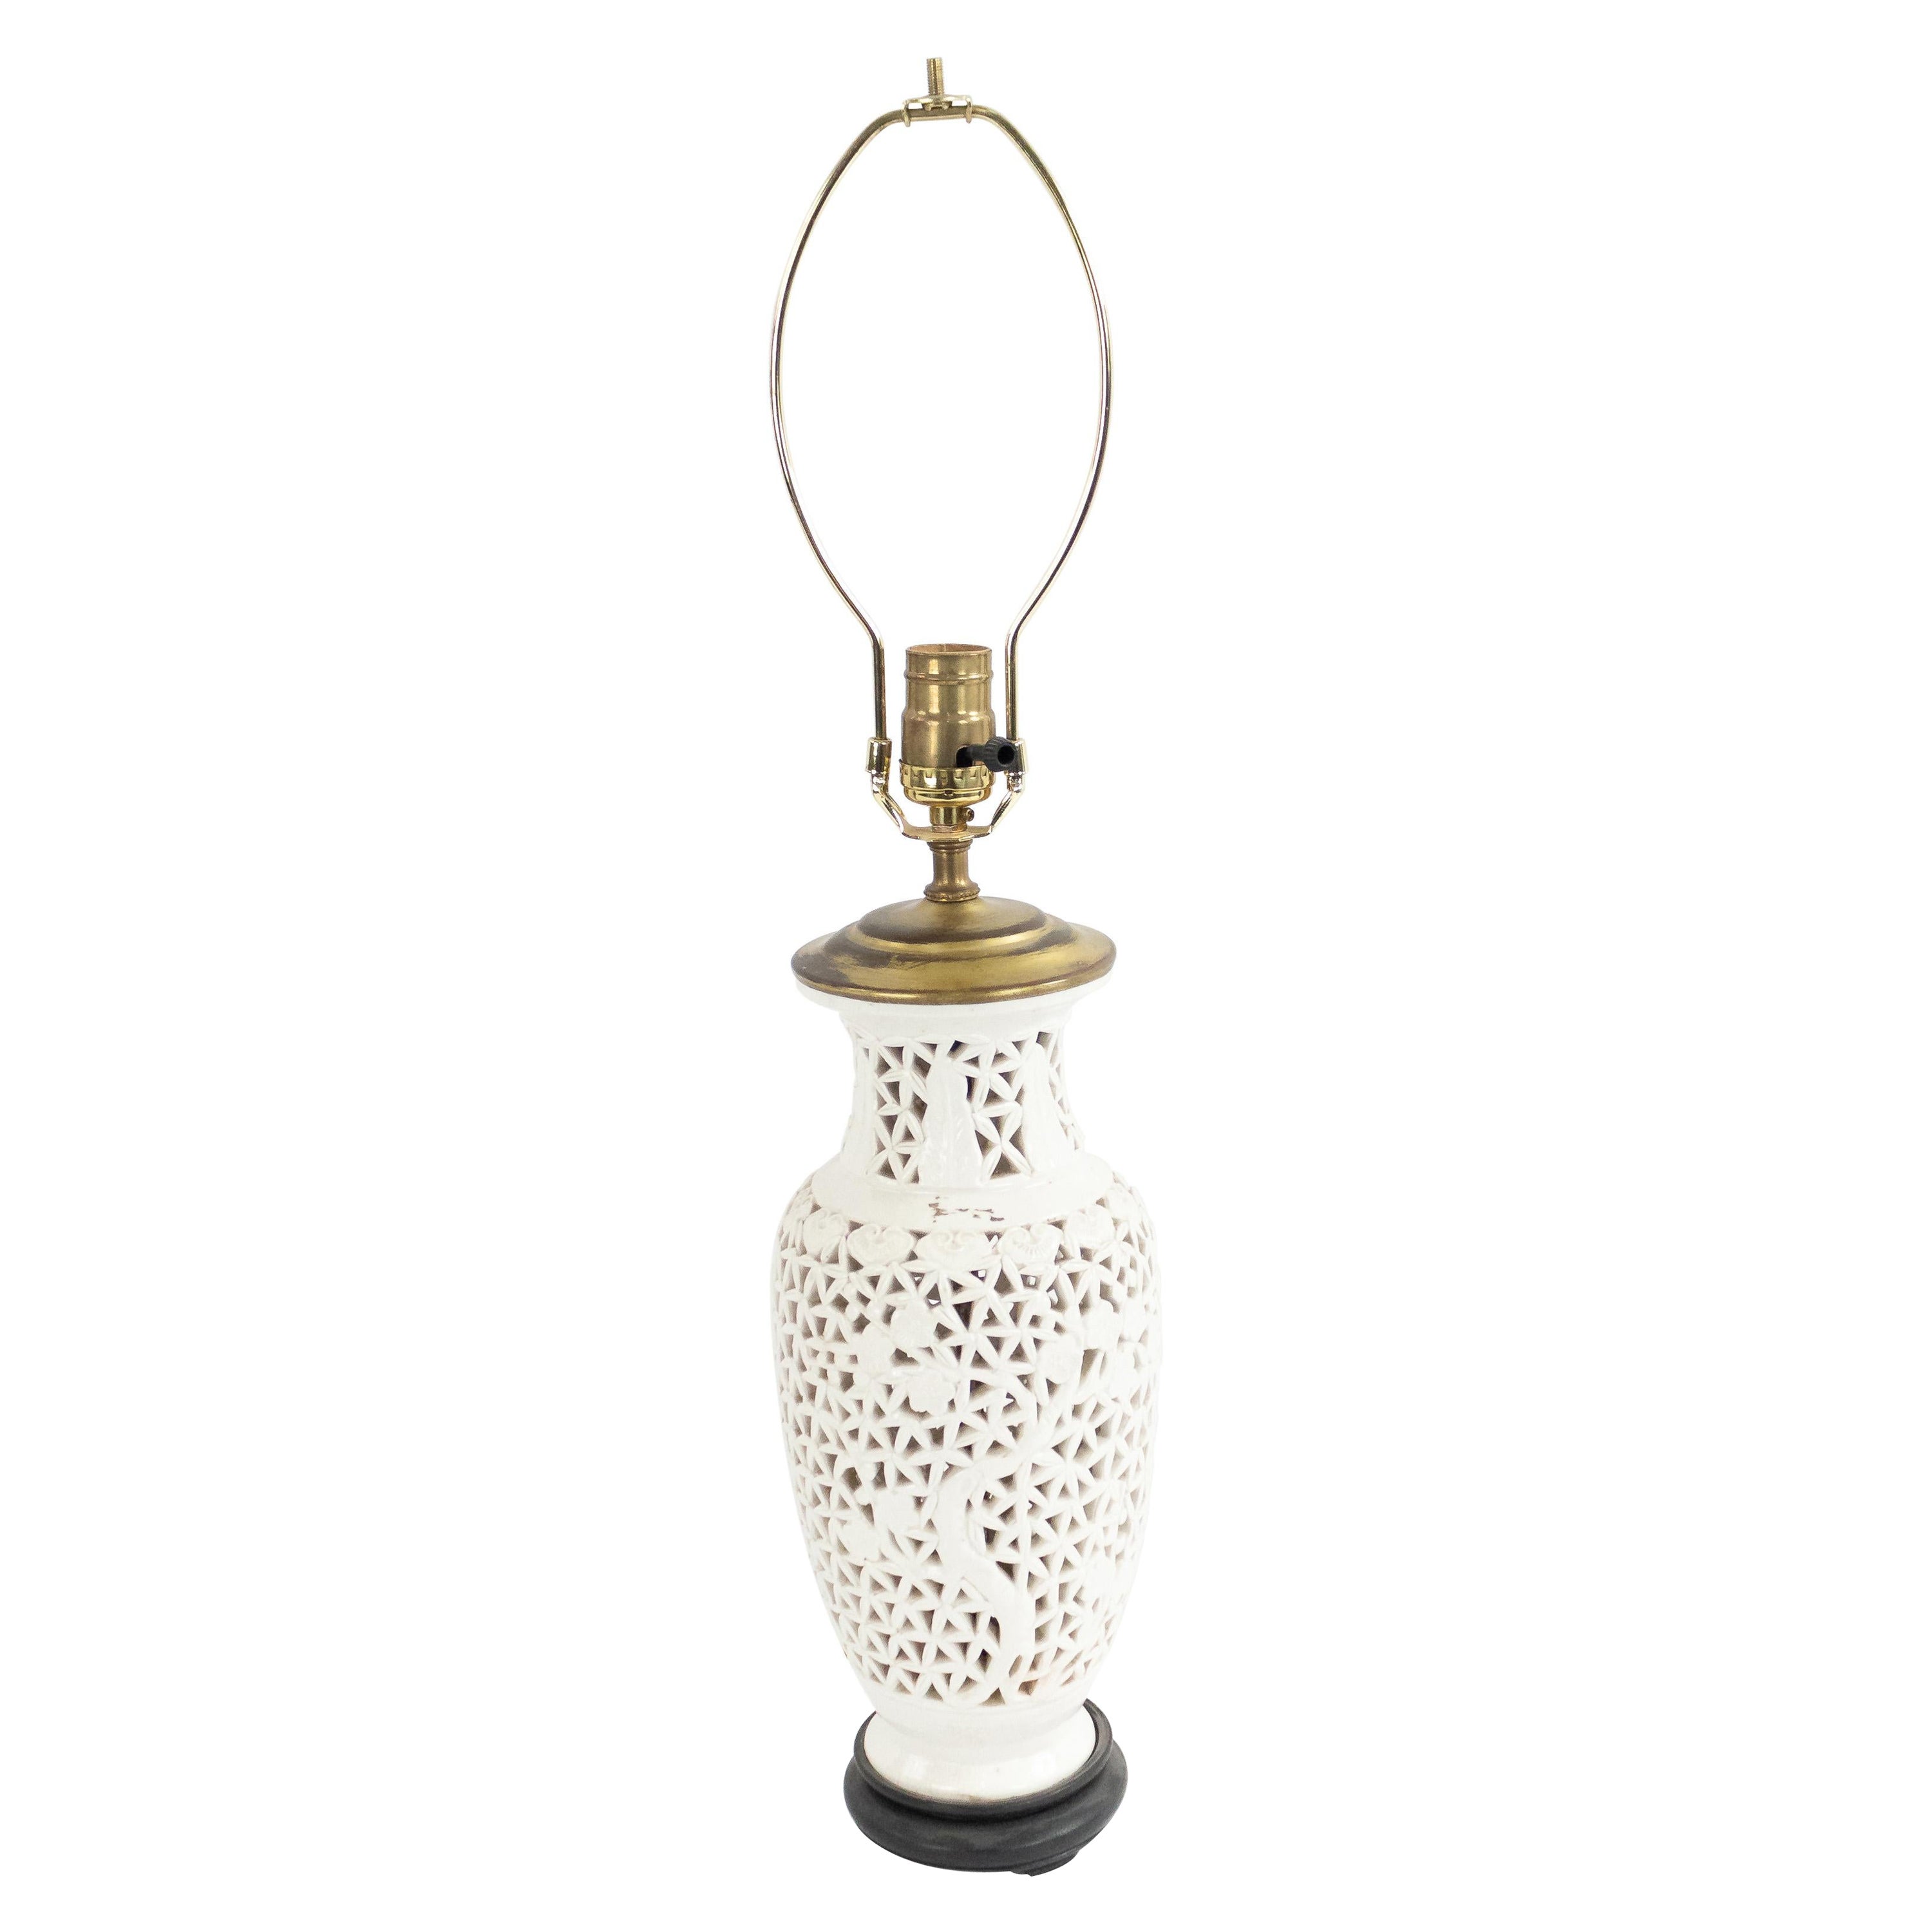 Chinese Reticulated White Porcelain Table Lamp